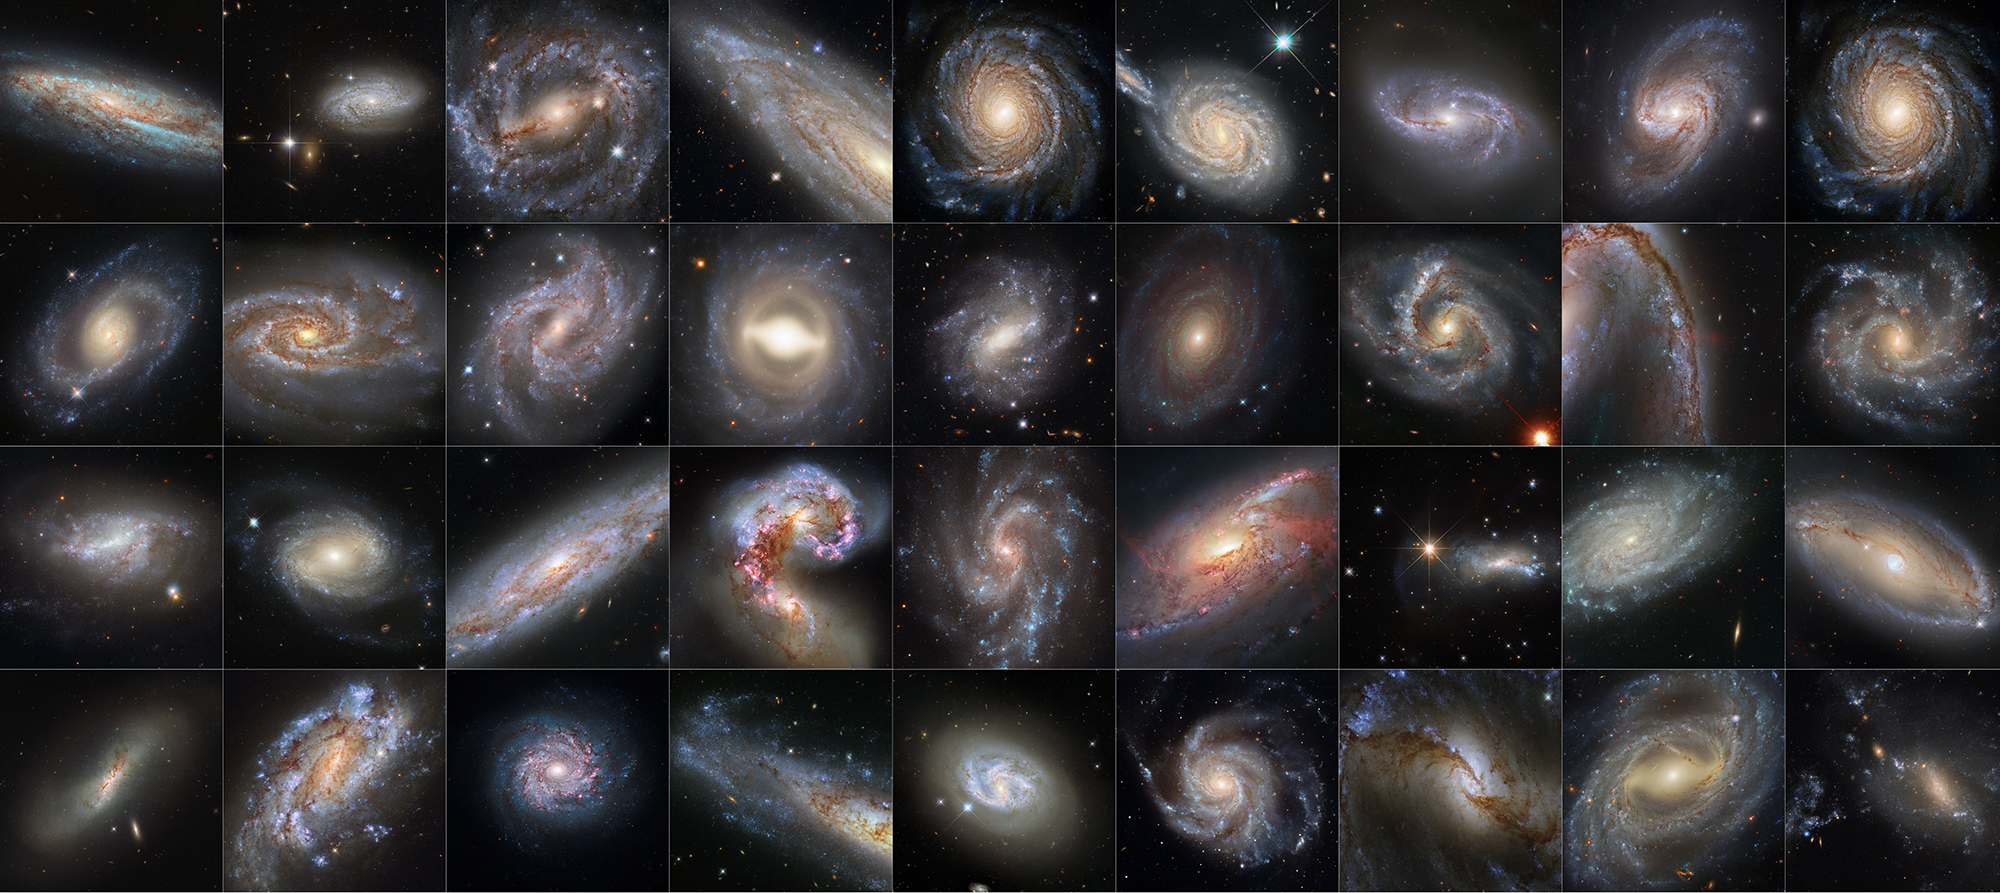 A grid of 36 galaxy images, 4 rows of 9 images each.